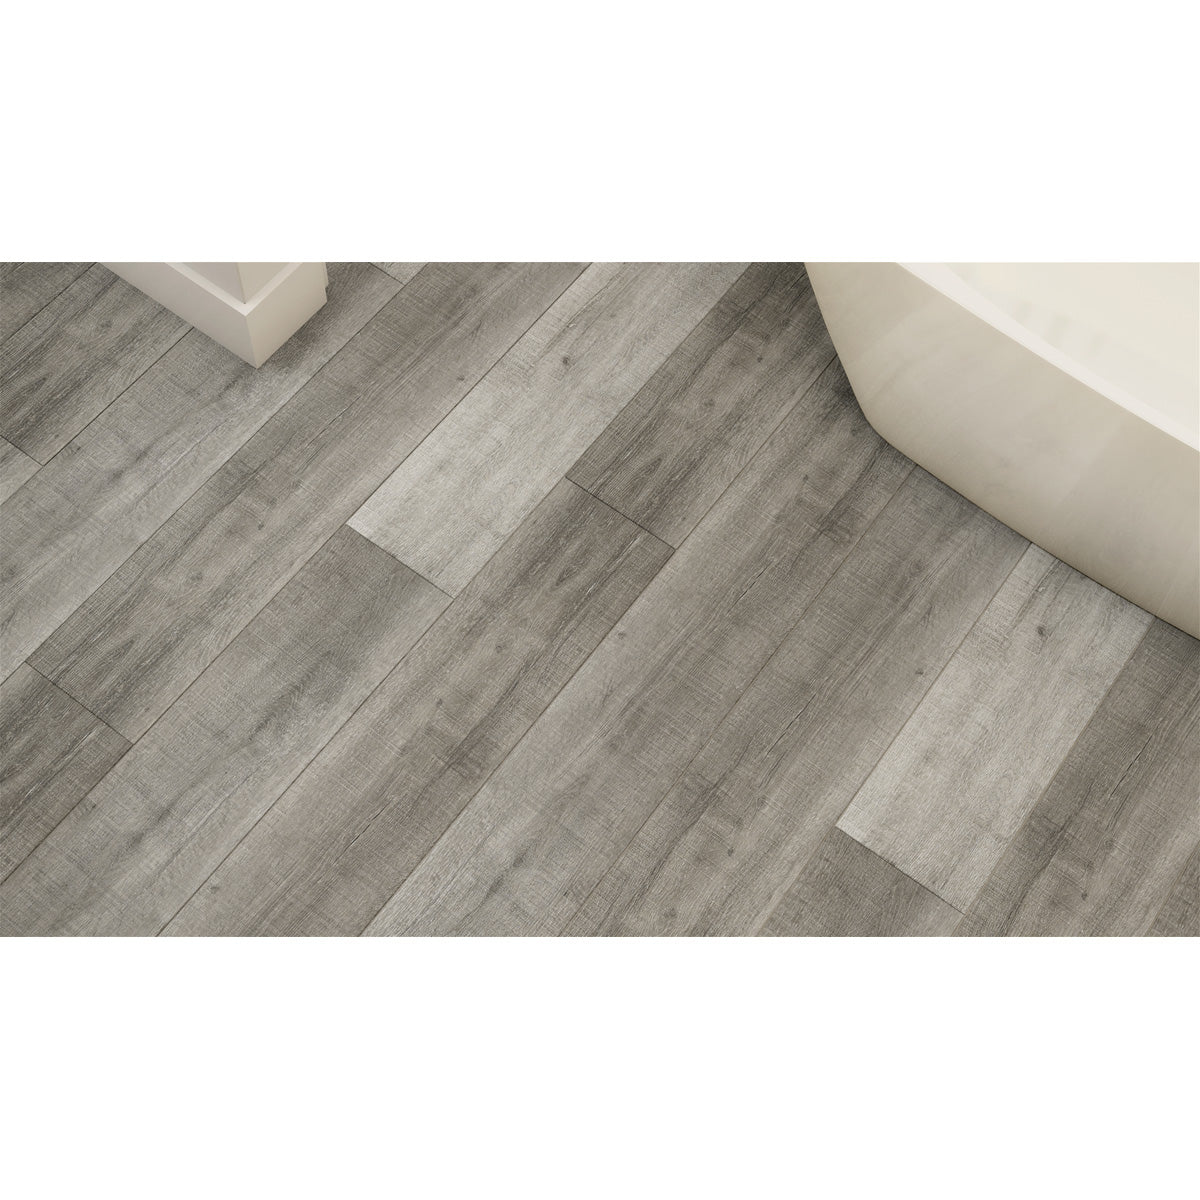 Engineered Floors - Triumph Collection - Bella Sera - 9 in. x 72 in. - Marrone Installed